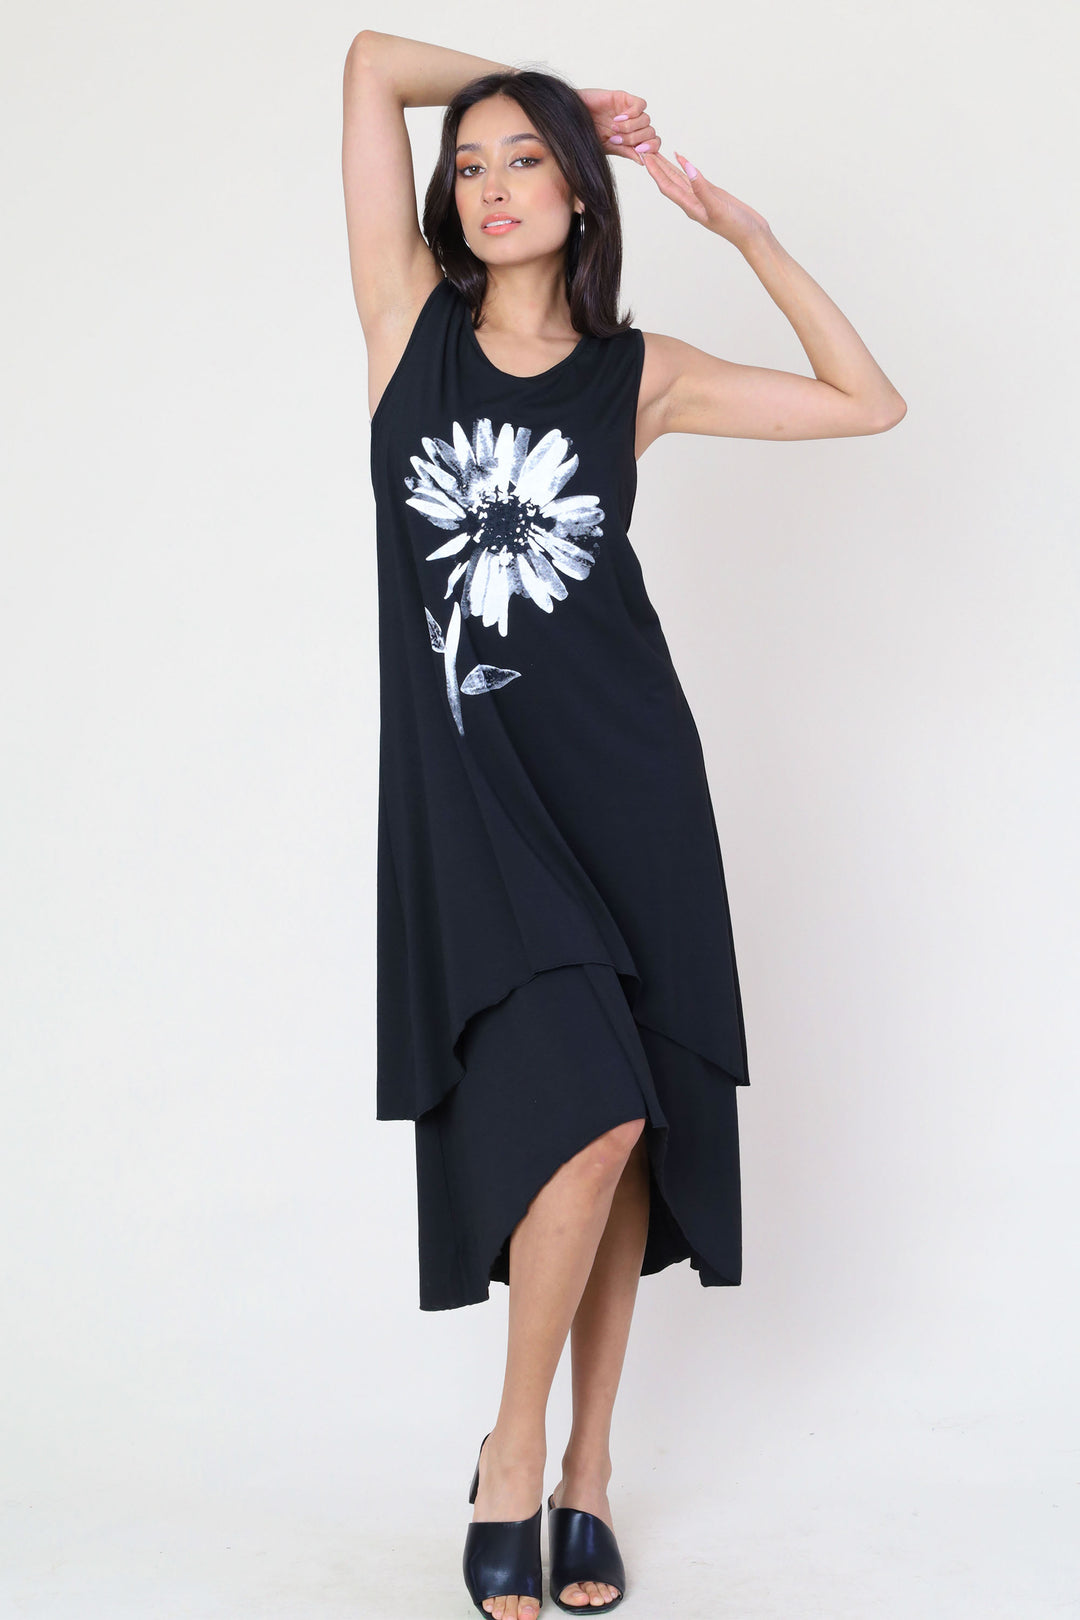 Fun Sport Summer 2024  Its loose high-low cut layered hem adds a touch of modernity to the classic silhouette, while the daisy on the chest adds a playful element. 